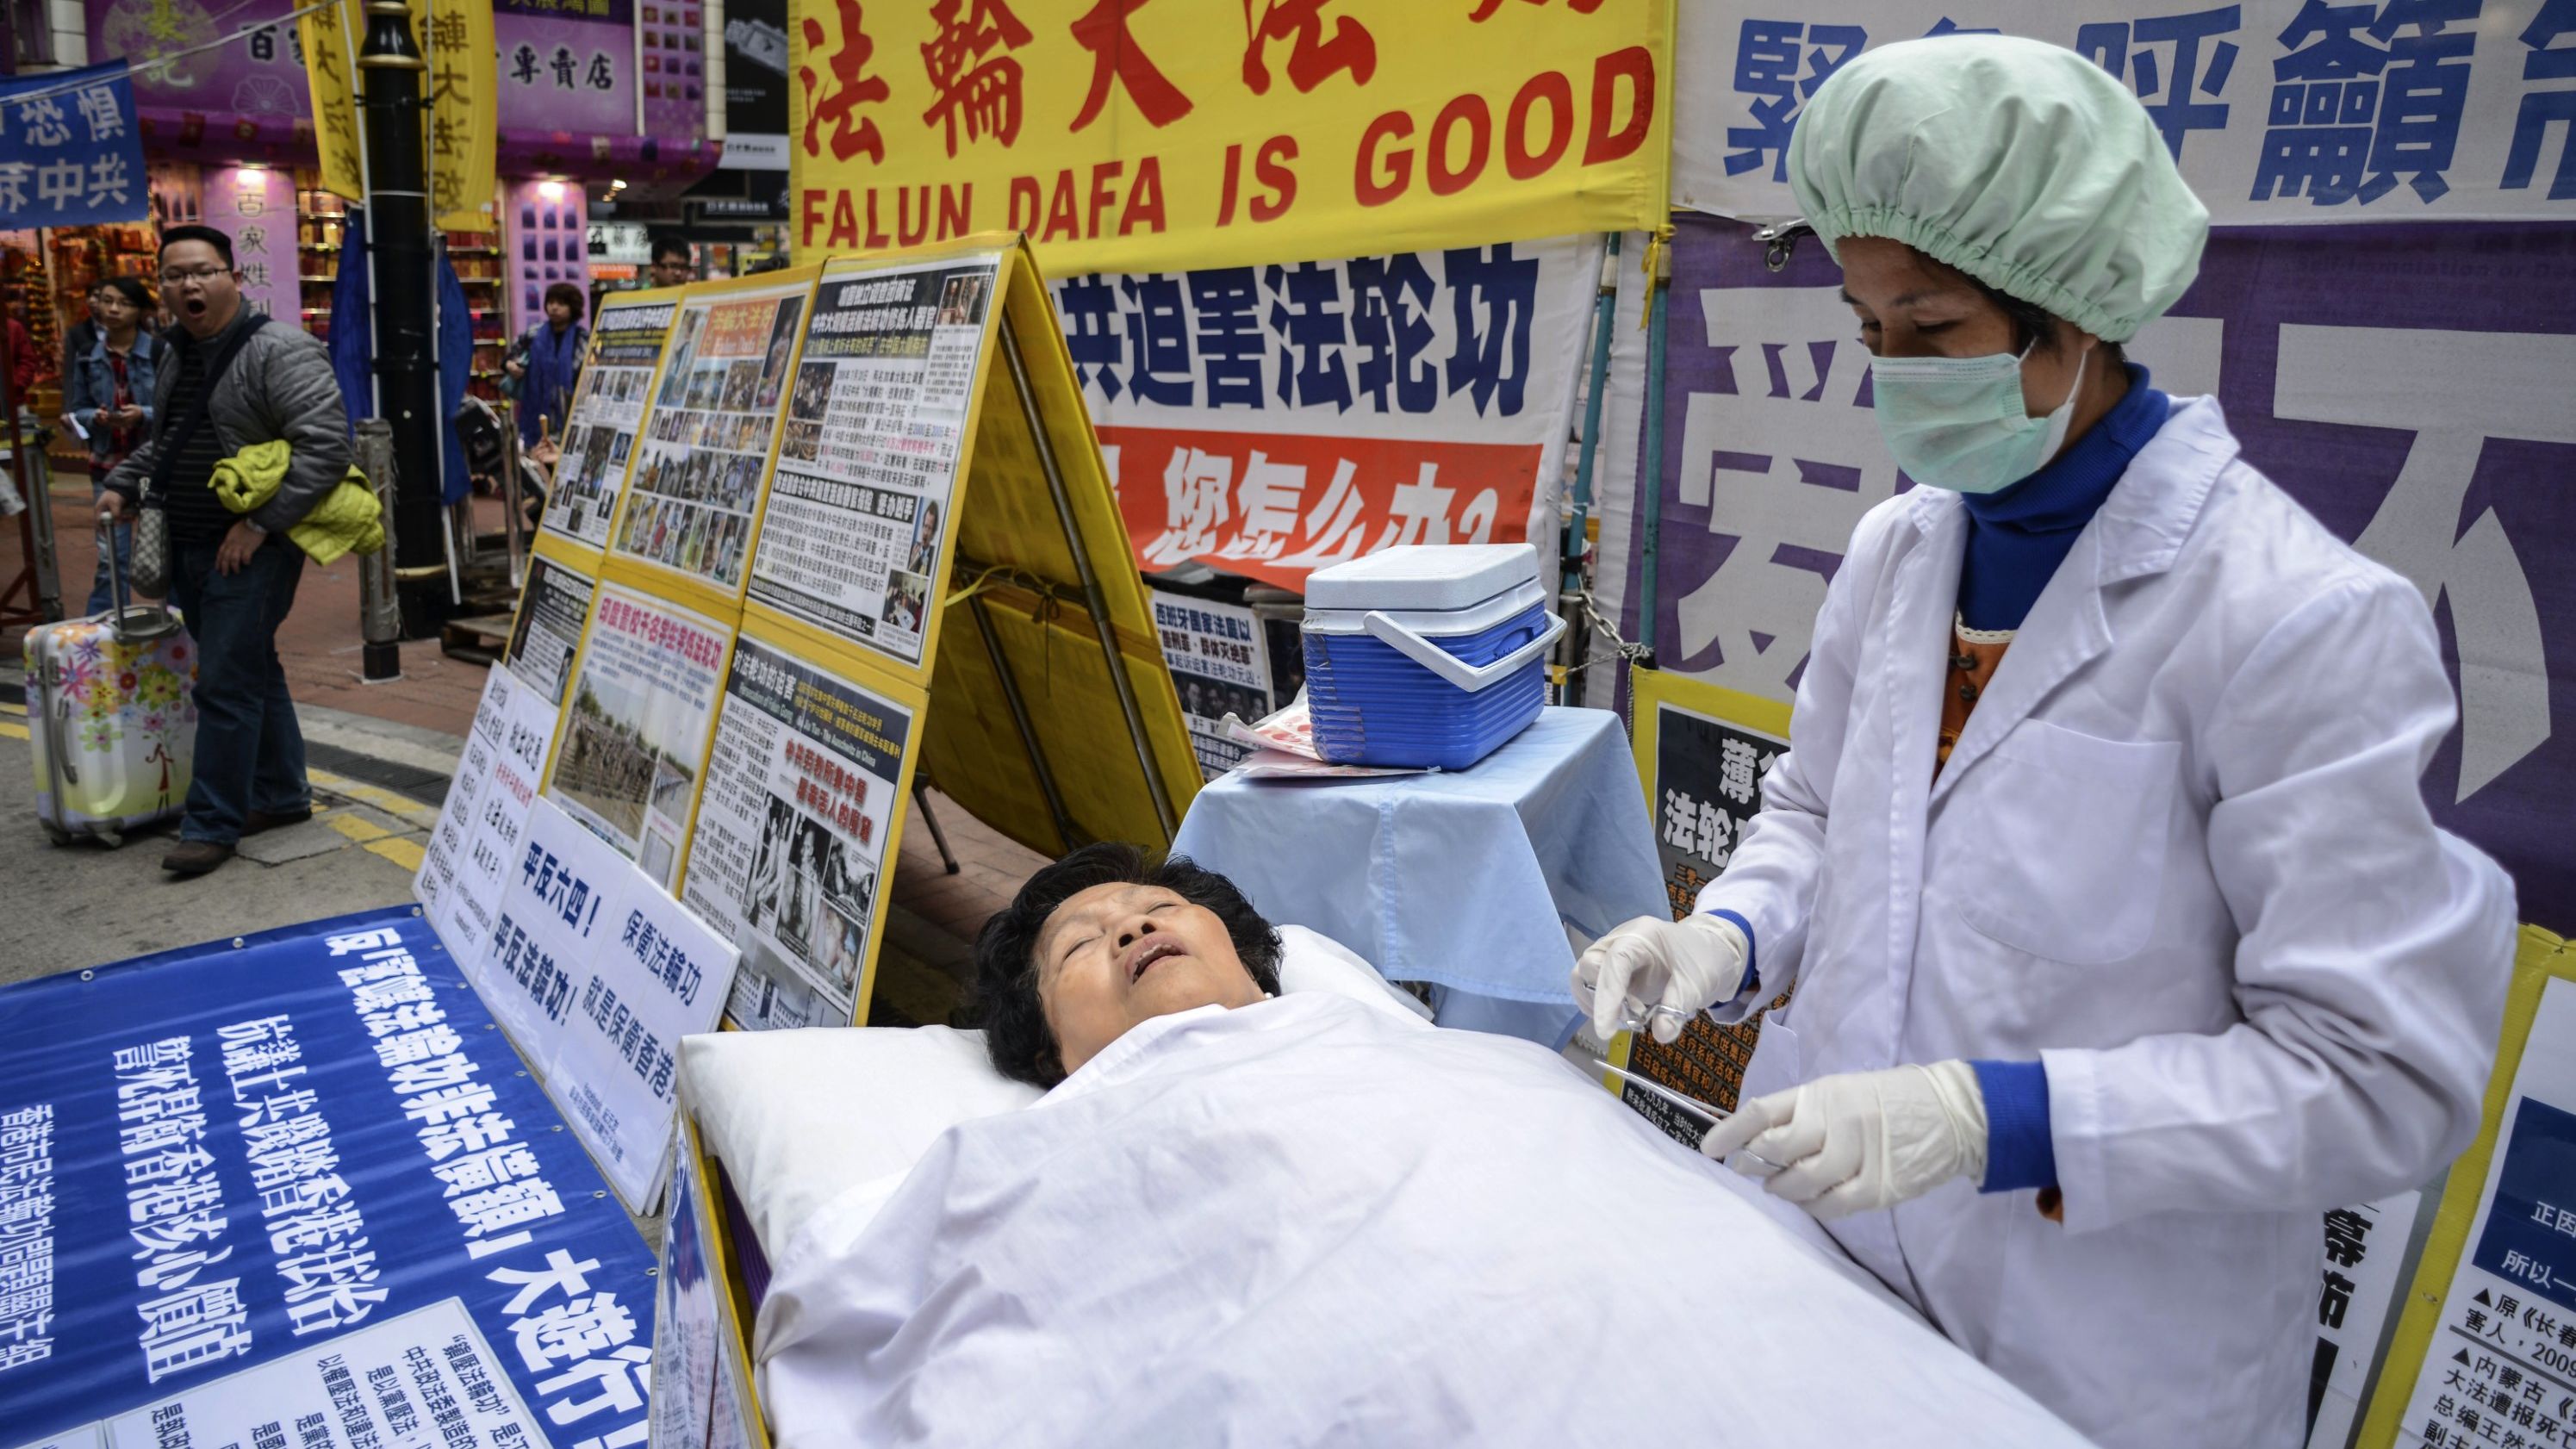 Falun Gong members stage a protest against China in Hong Kong. 